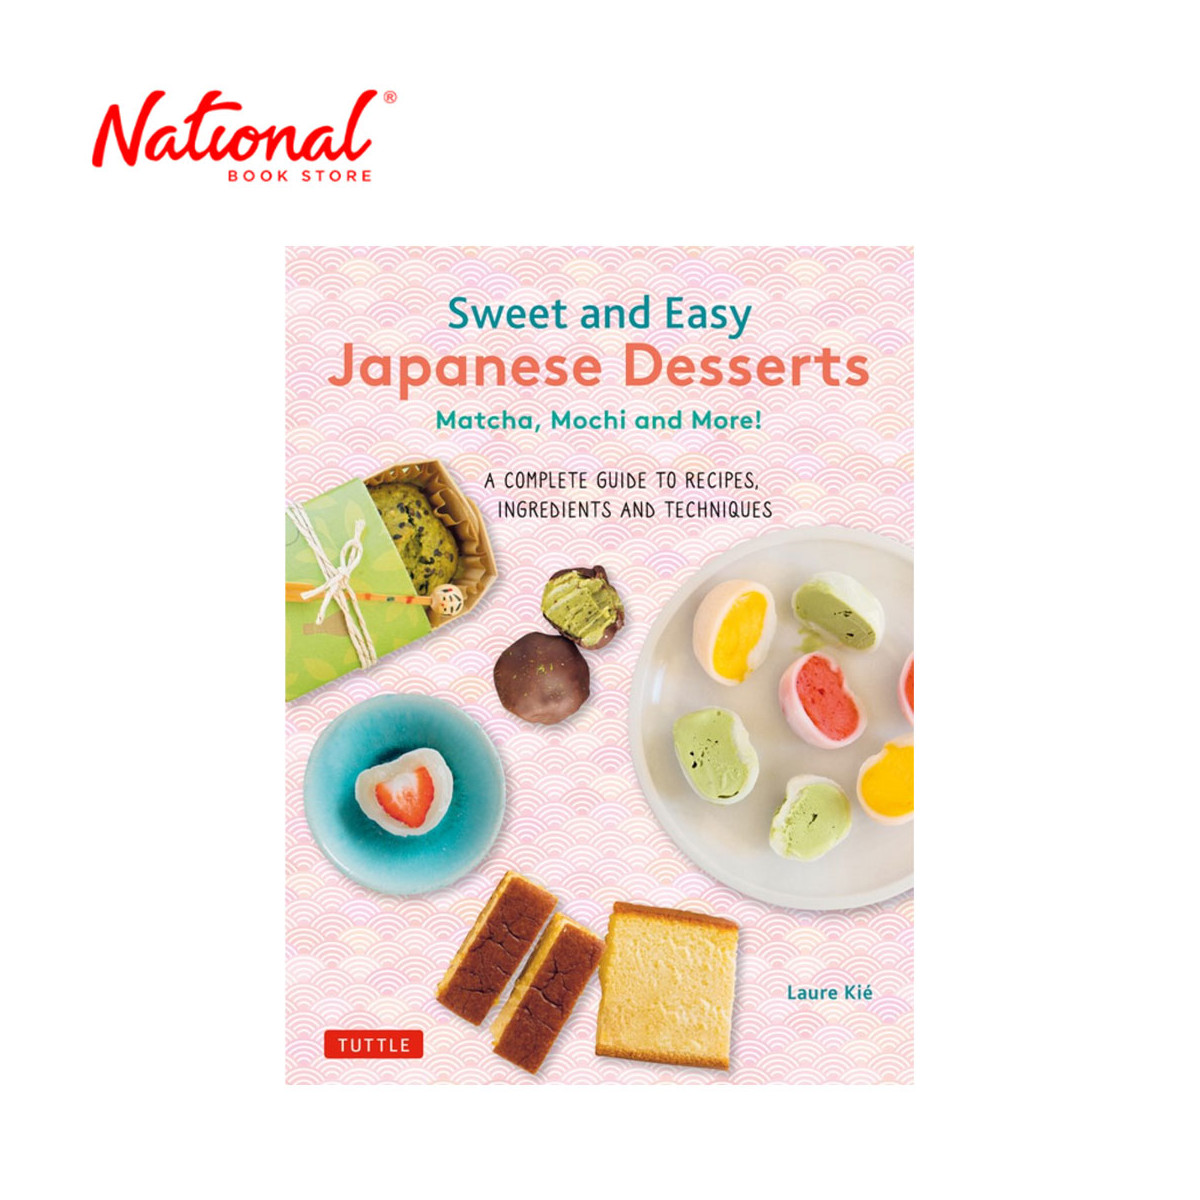 Sweet and Easy Japanese Desserts by Laure Kie - Trade Paperback - Asian Cooking